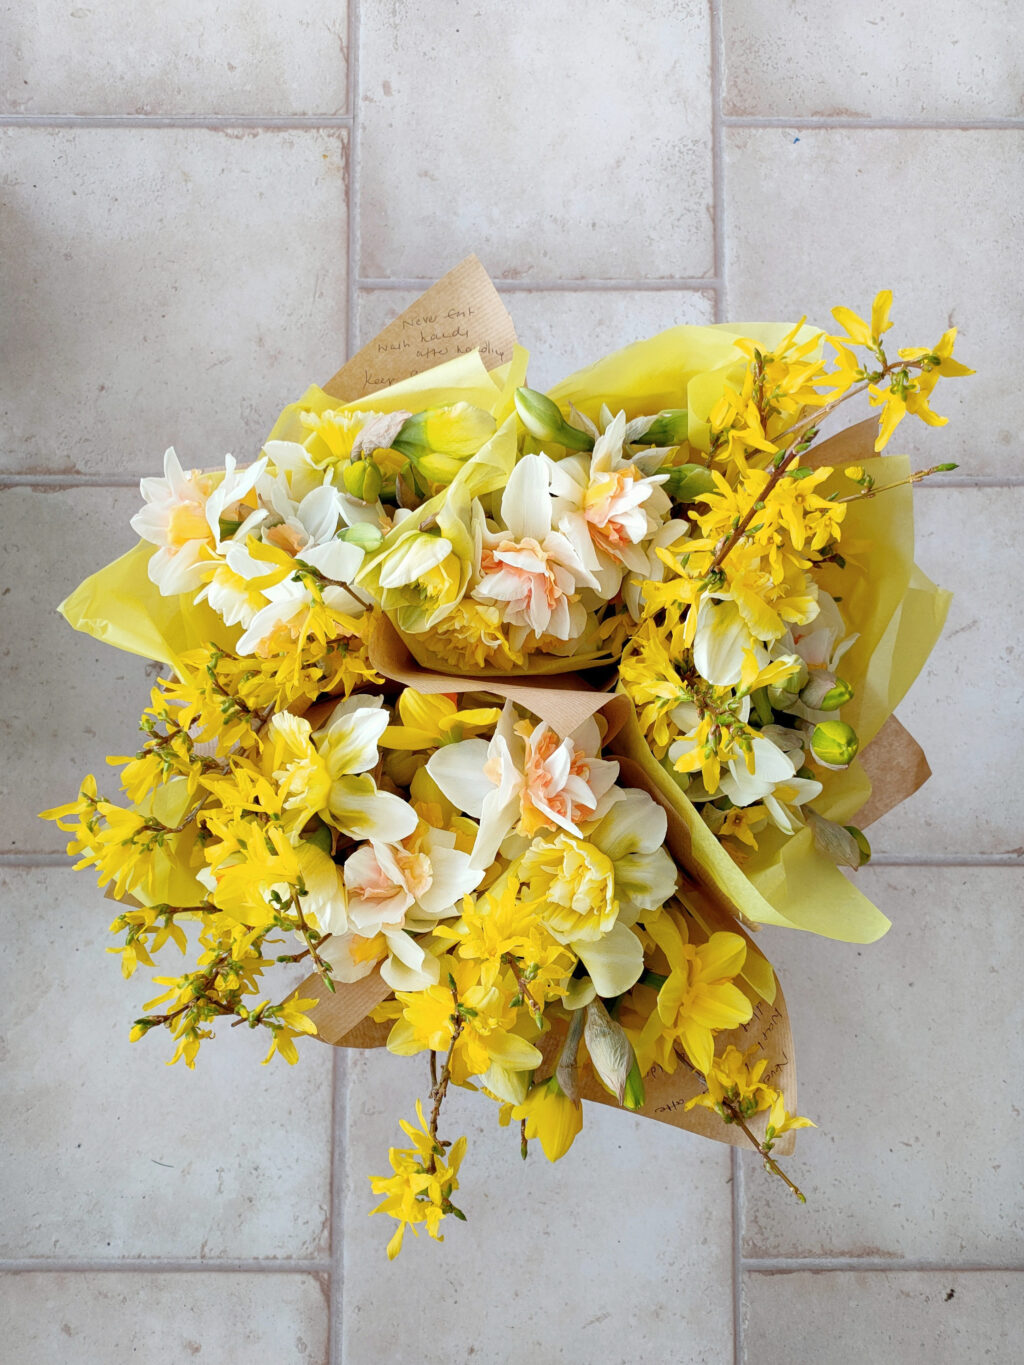 A collection of yellow easter posies with narcissi and forsythia by The Garden Gate Southwold.